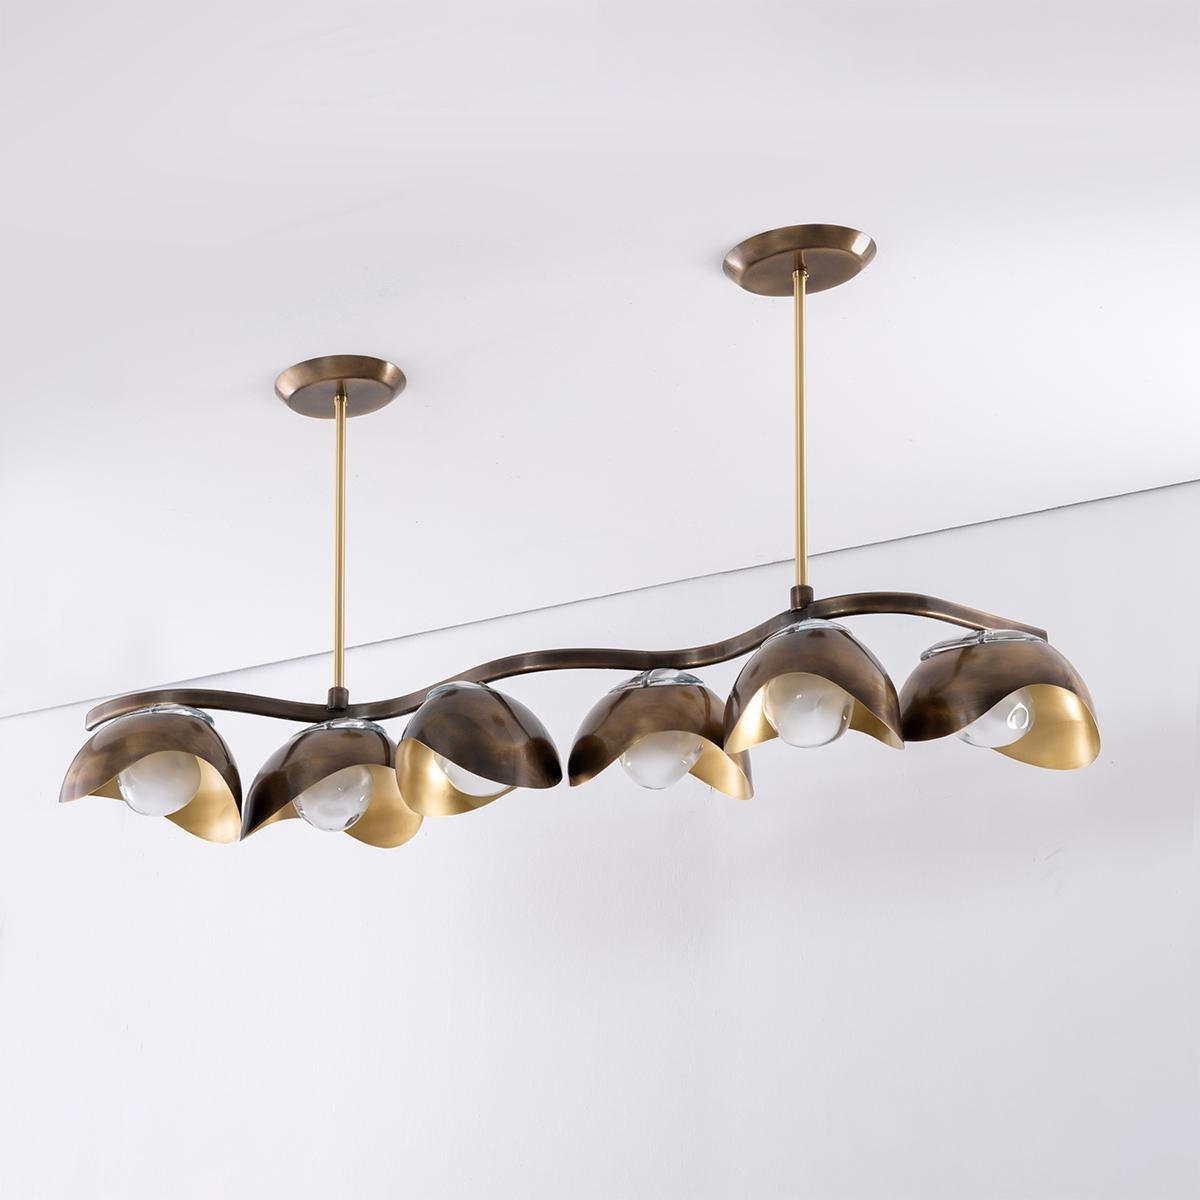 Contemporary Serpente Ceiling Light by Gaspare Asaro- Brass Finish For Sale